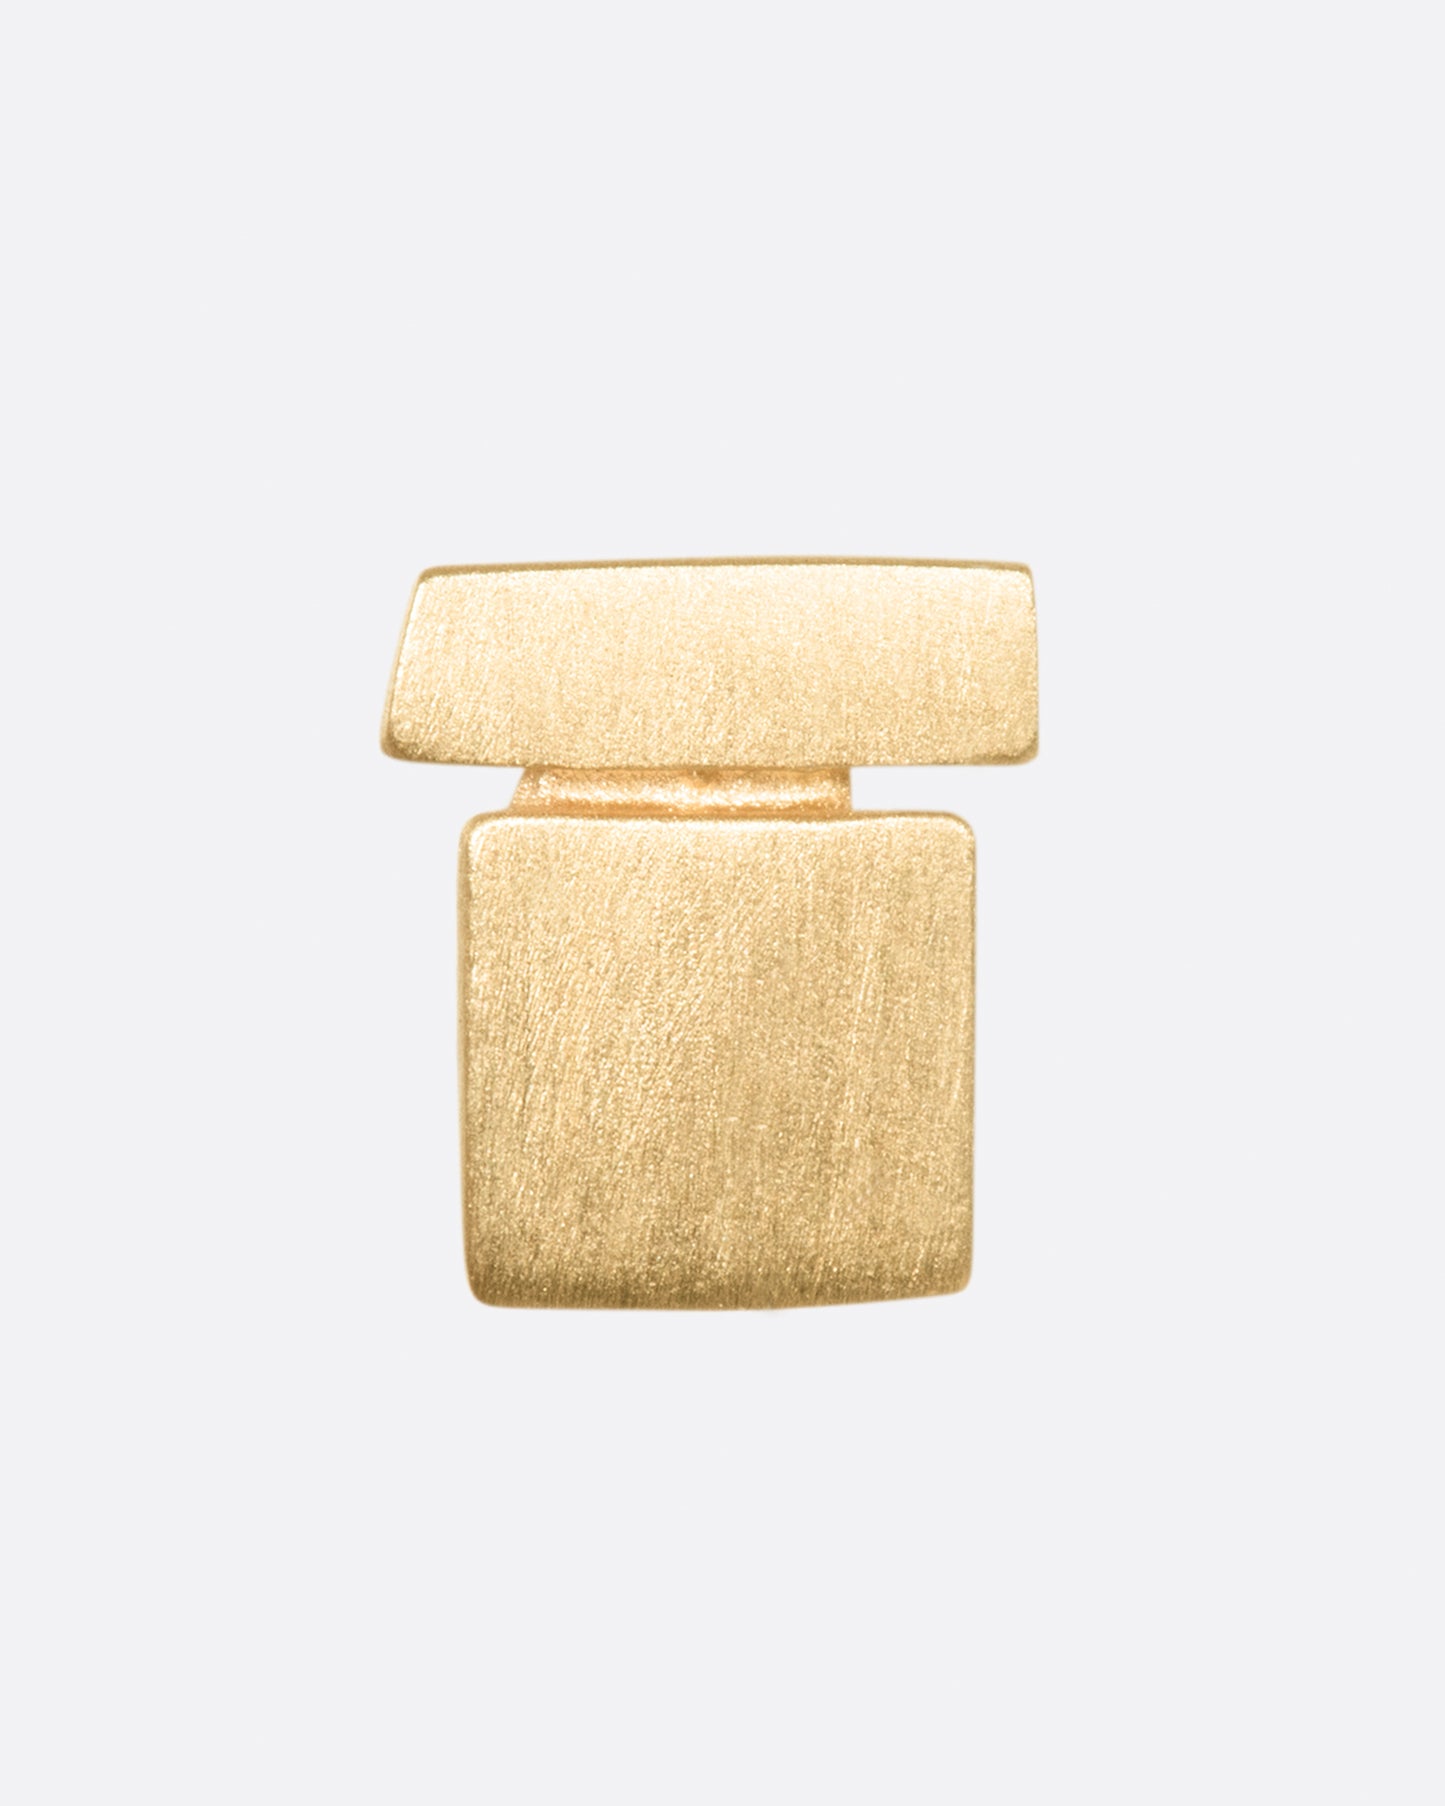 A yellow gold stacked geometric stud earring with matte finish. 